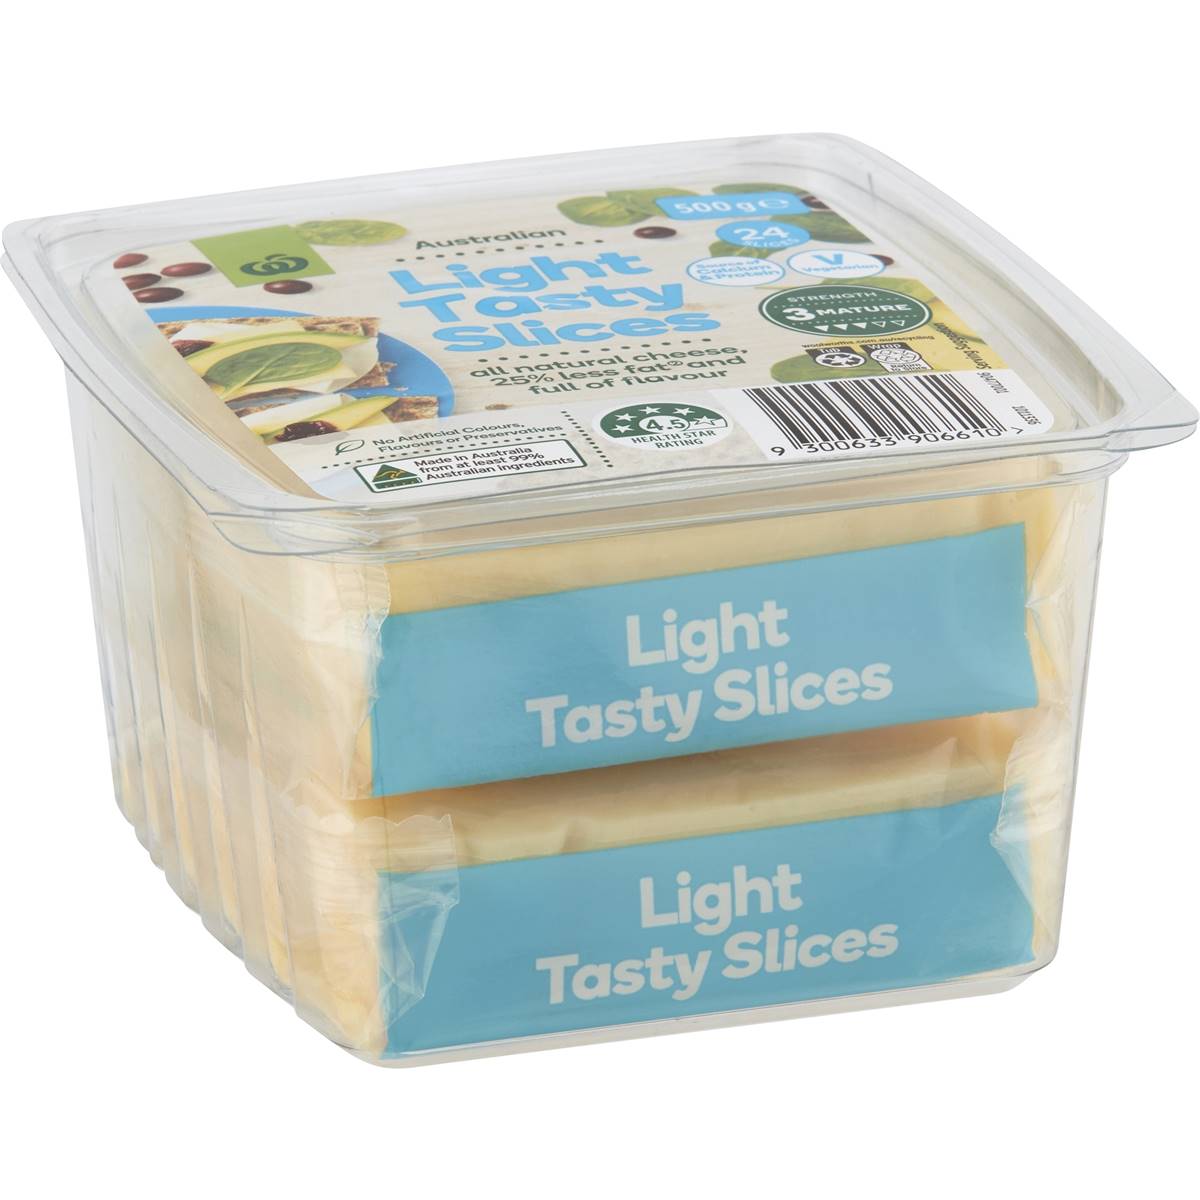 Calories in Woolworths Tasty Light Cheese Slices